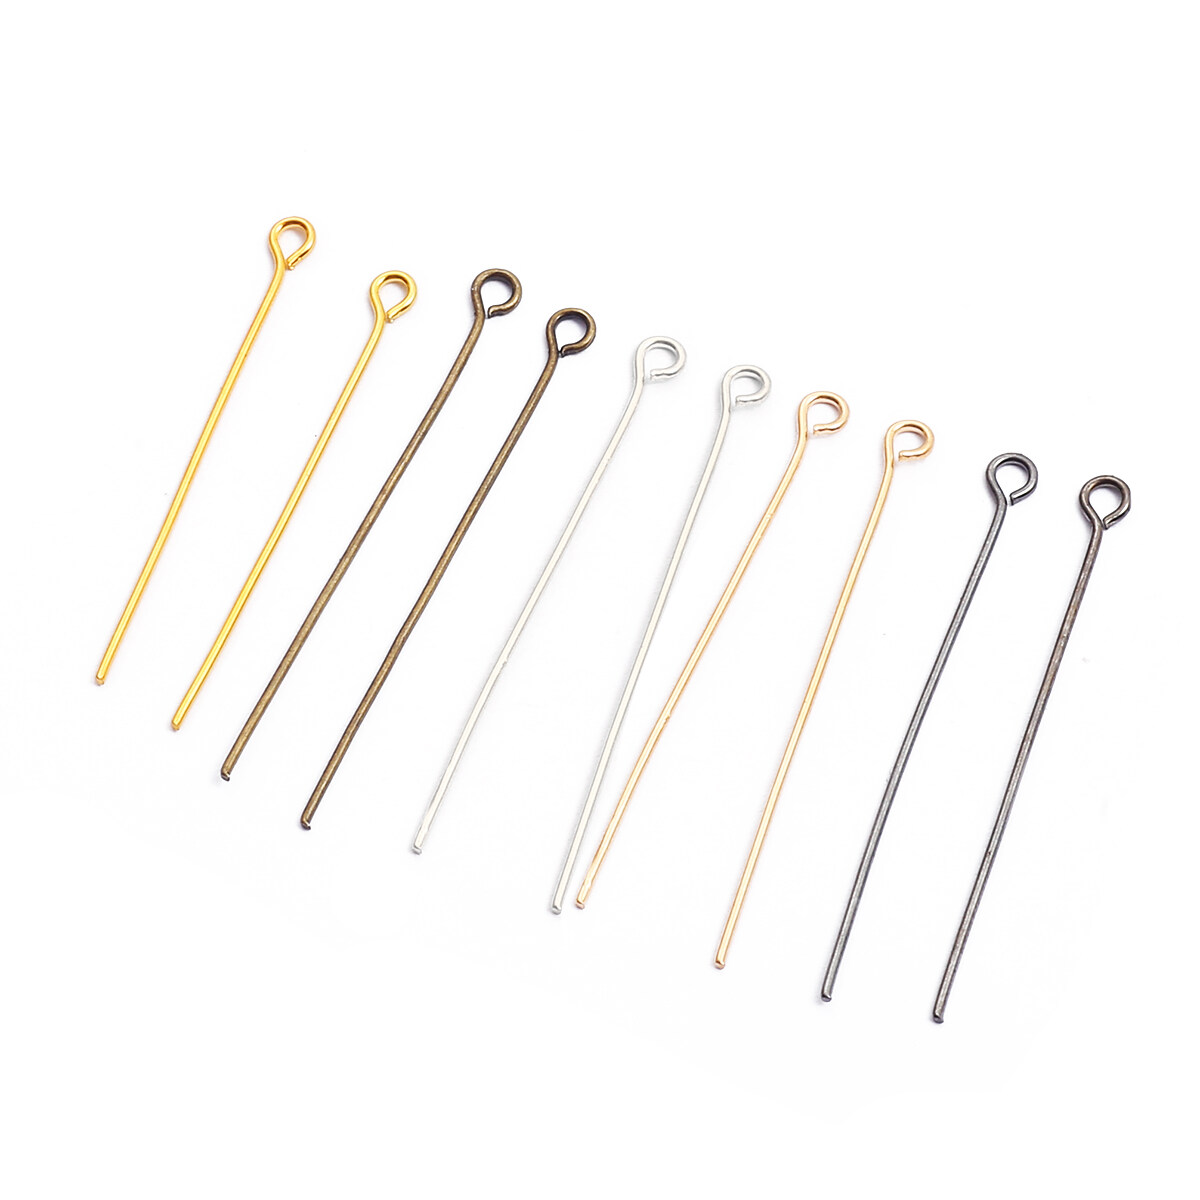 100PCS Silver Gold Plated Ball Head Pins Jewelry Finding 16/20/30/40/50mm 